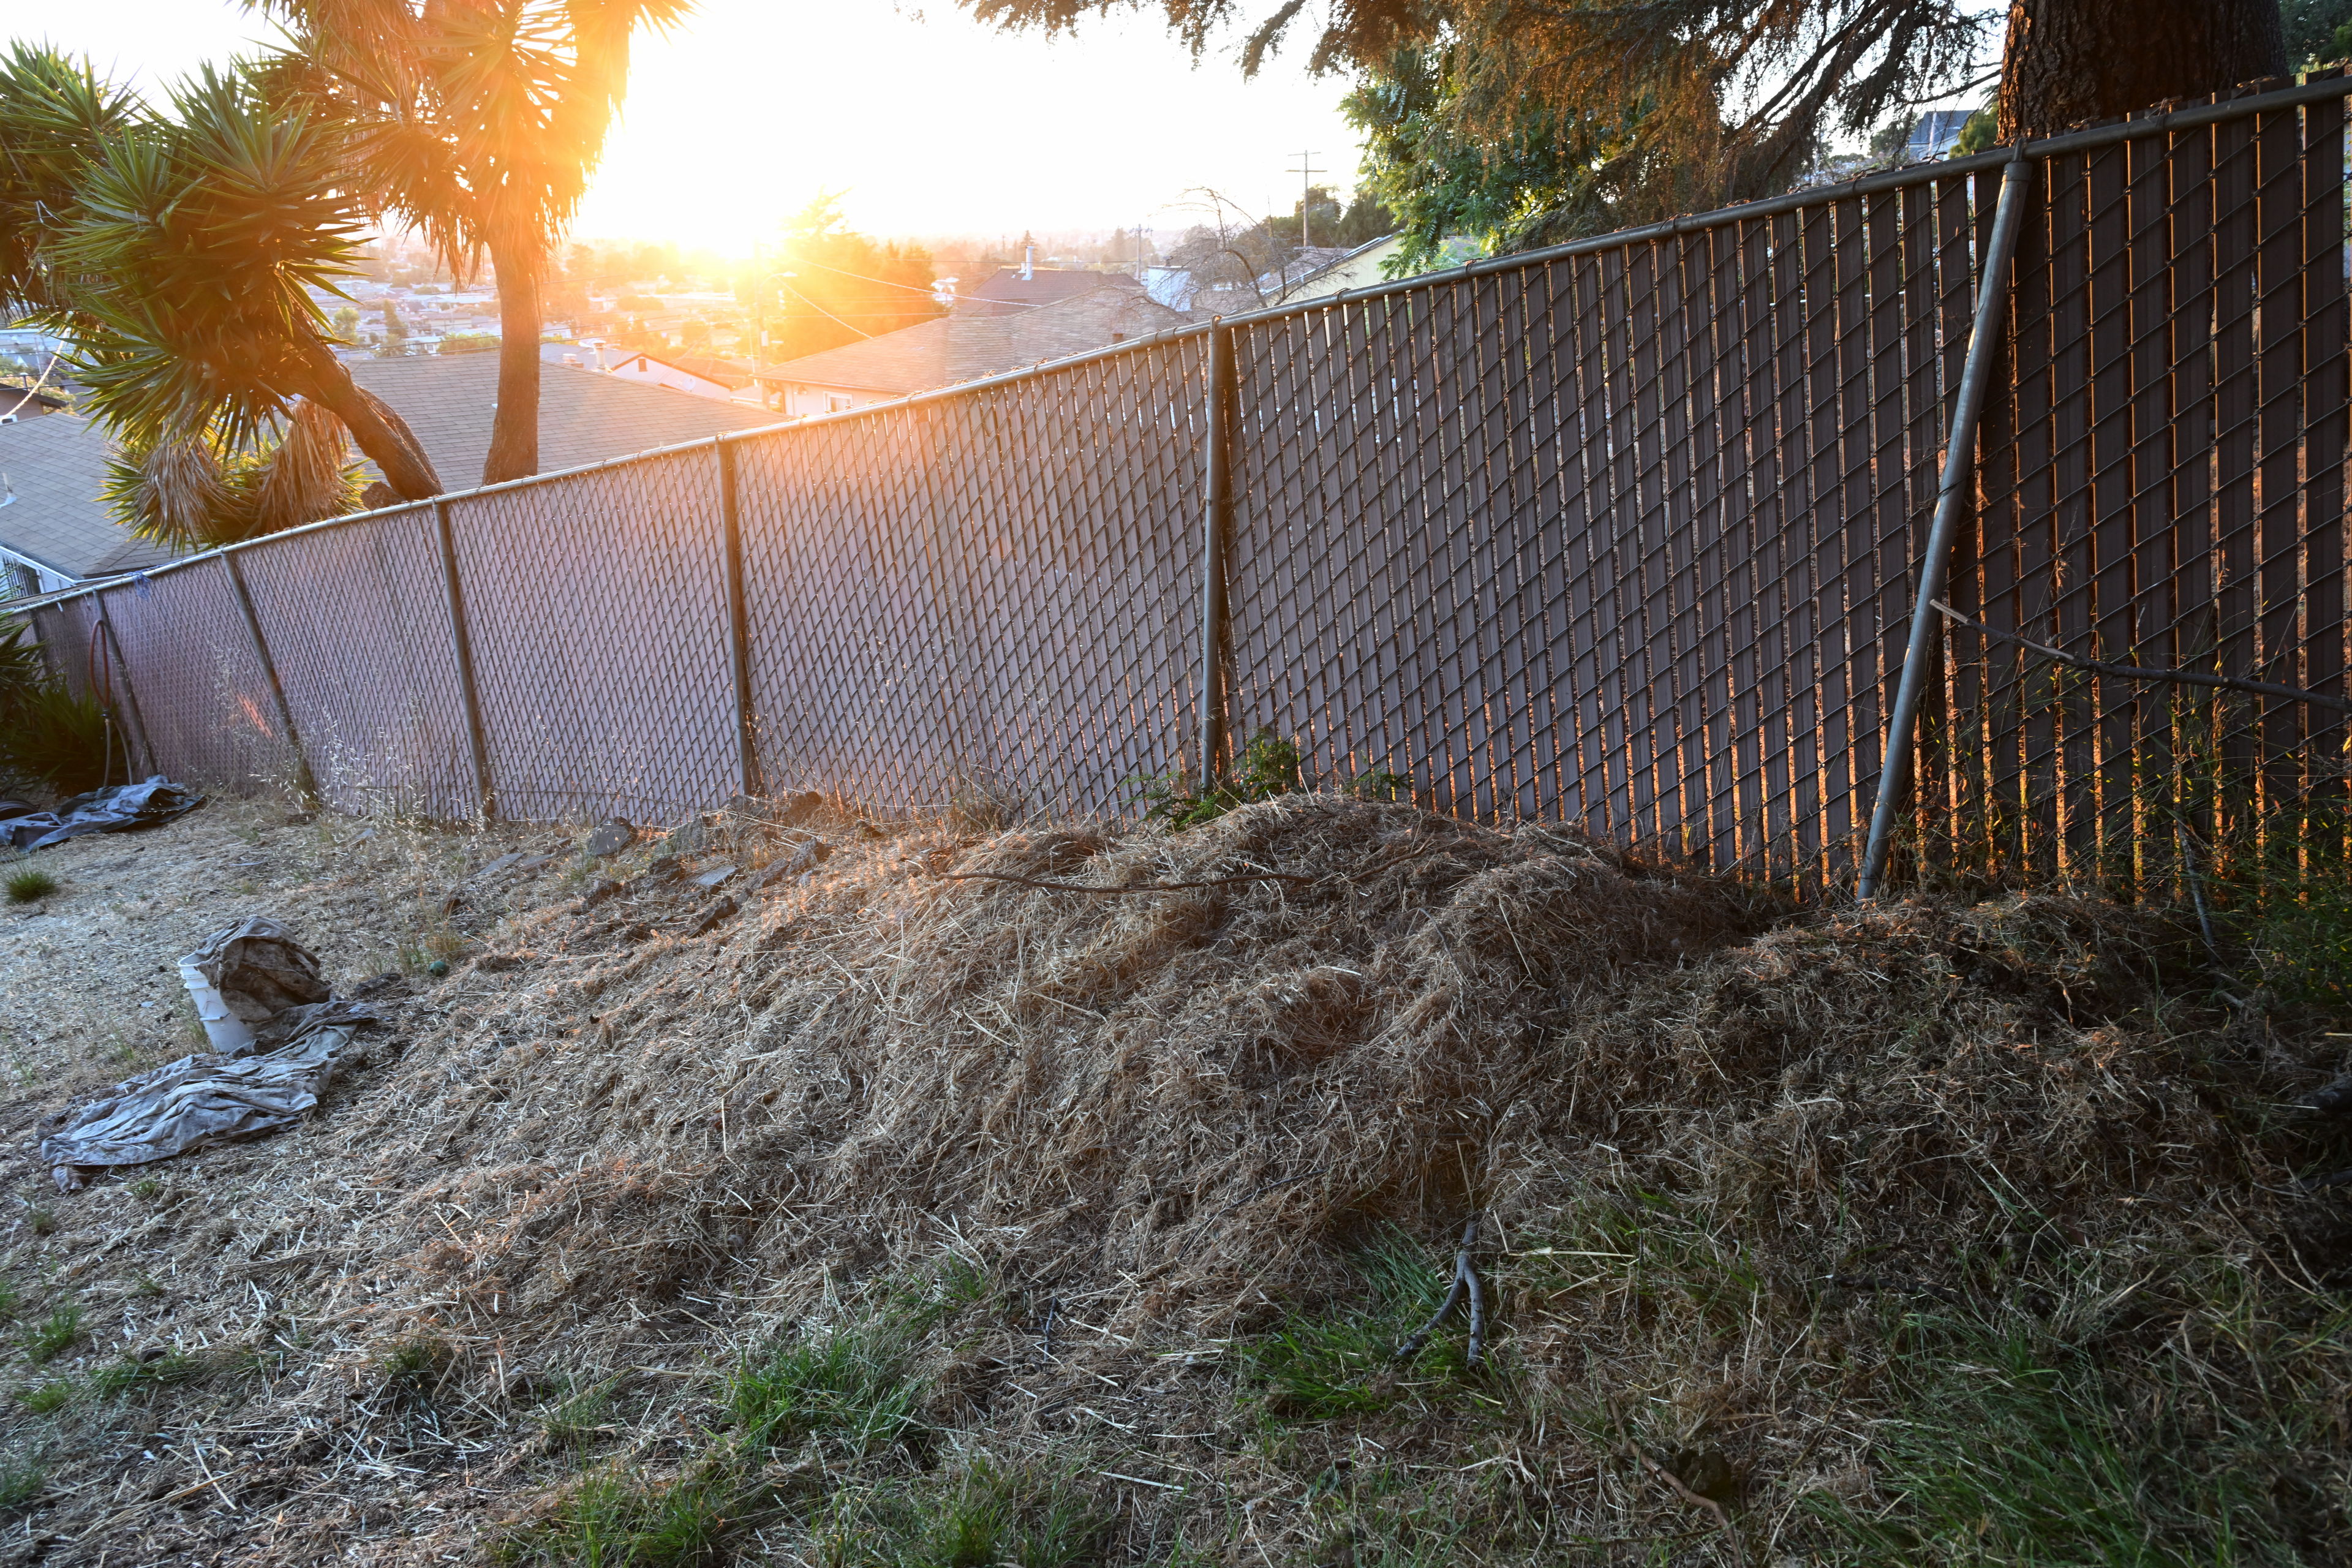 That small indentation on the right side of this pile of grass is where Remi carved out a little resting place Friday afternoon so he could lie in the sun. (This photo was taken the next day though.)